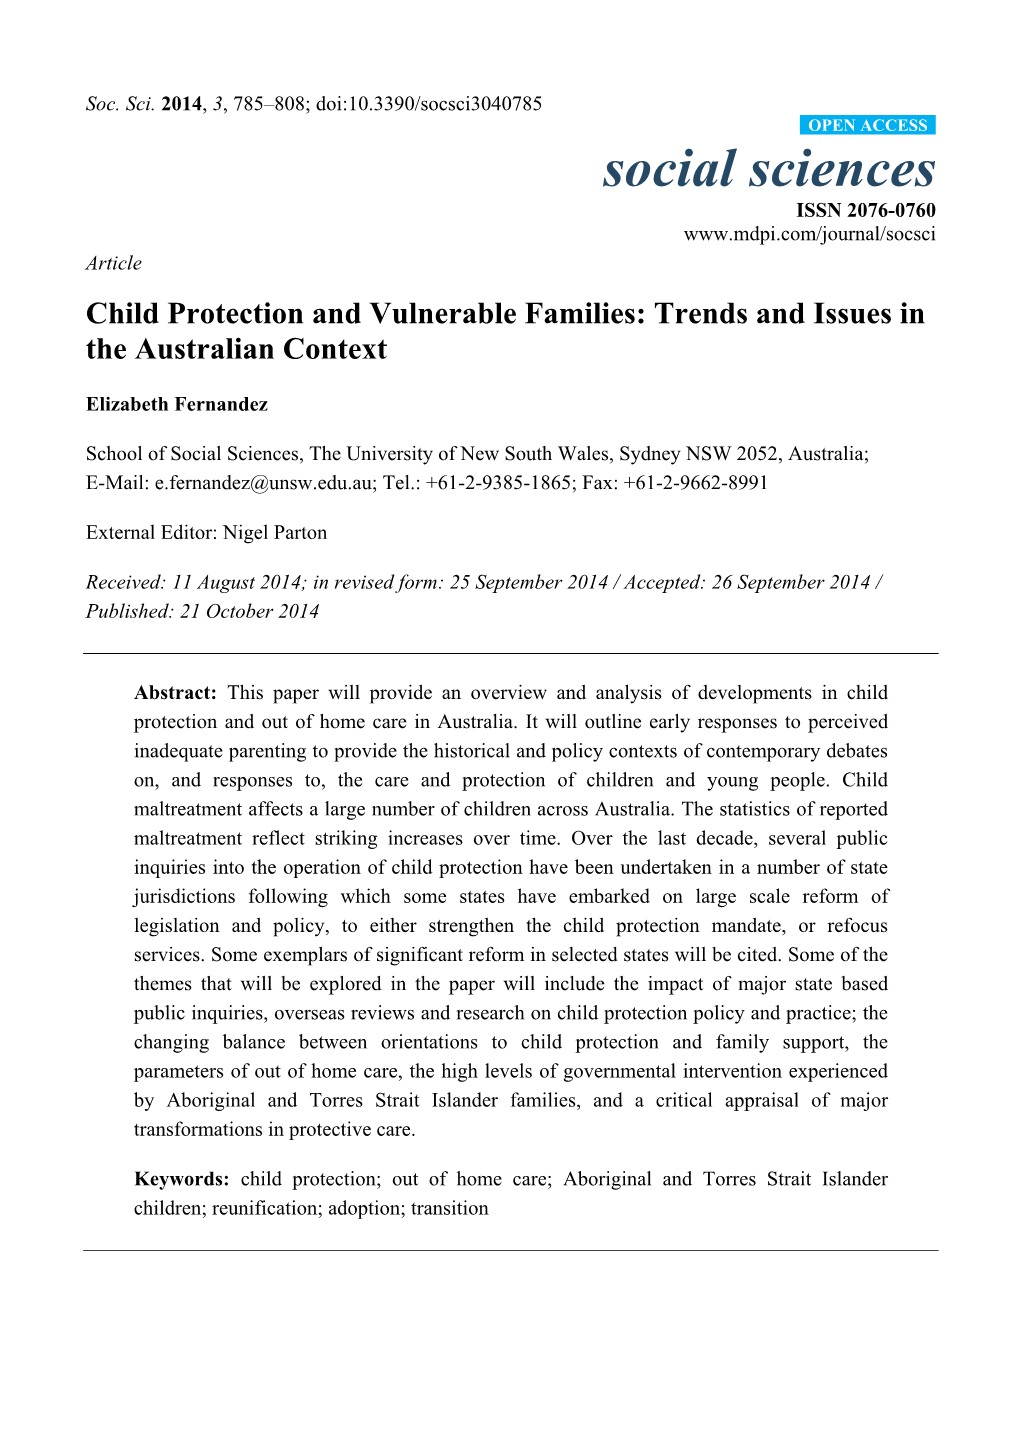 Child Protection and Vulnerable Families: Trends and Issues in the Australian Context